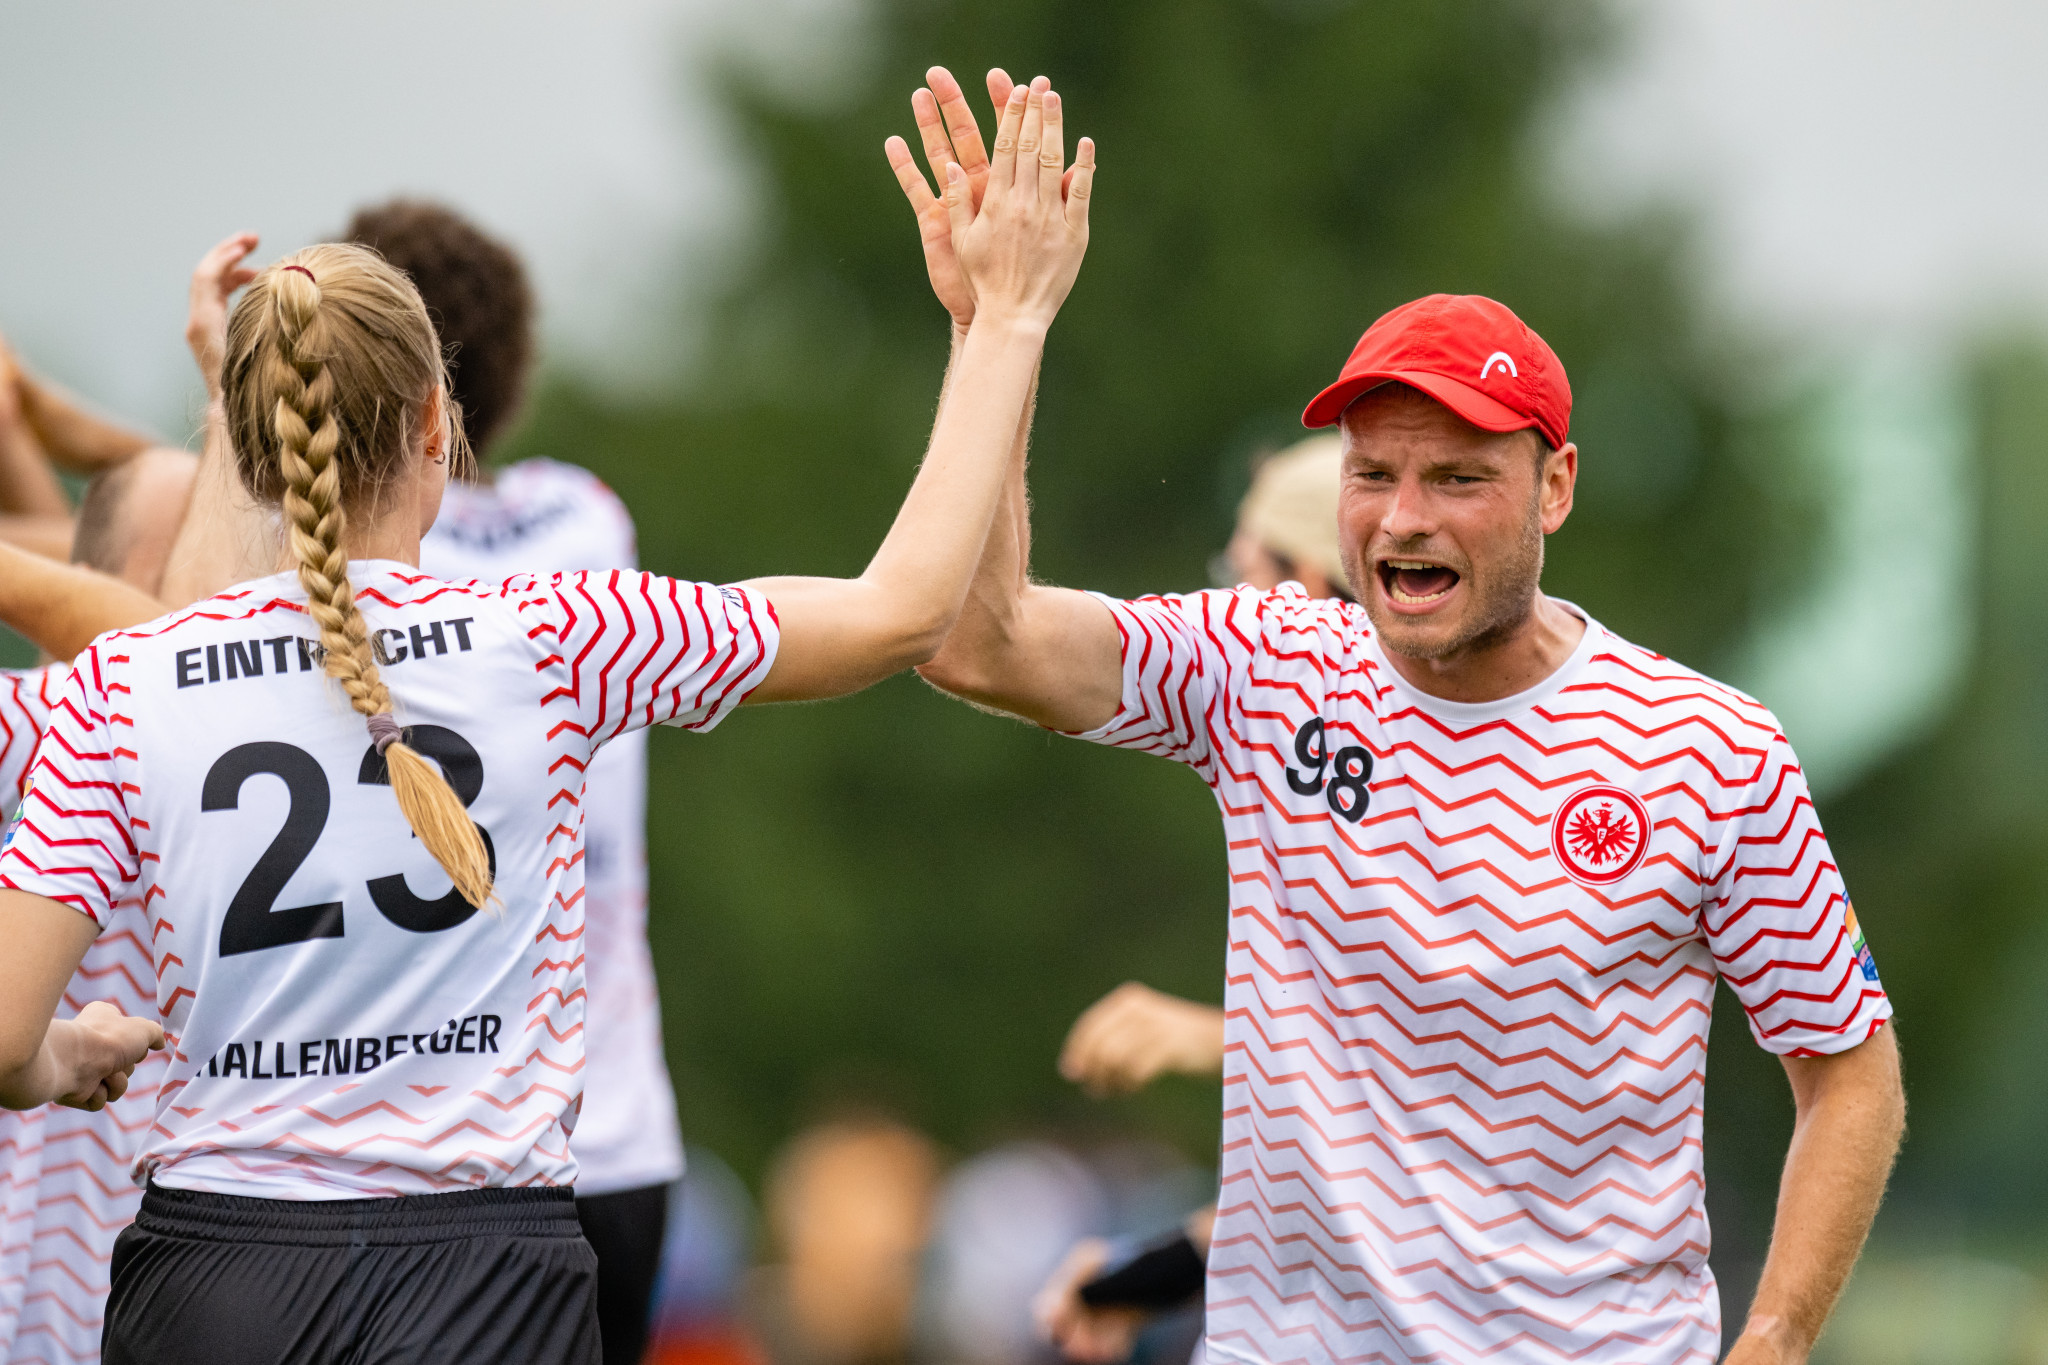 Eintracht Frankfurt sit third in Pool B of the mixed team event ©Samuel Hotaling for UltiPhotos